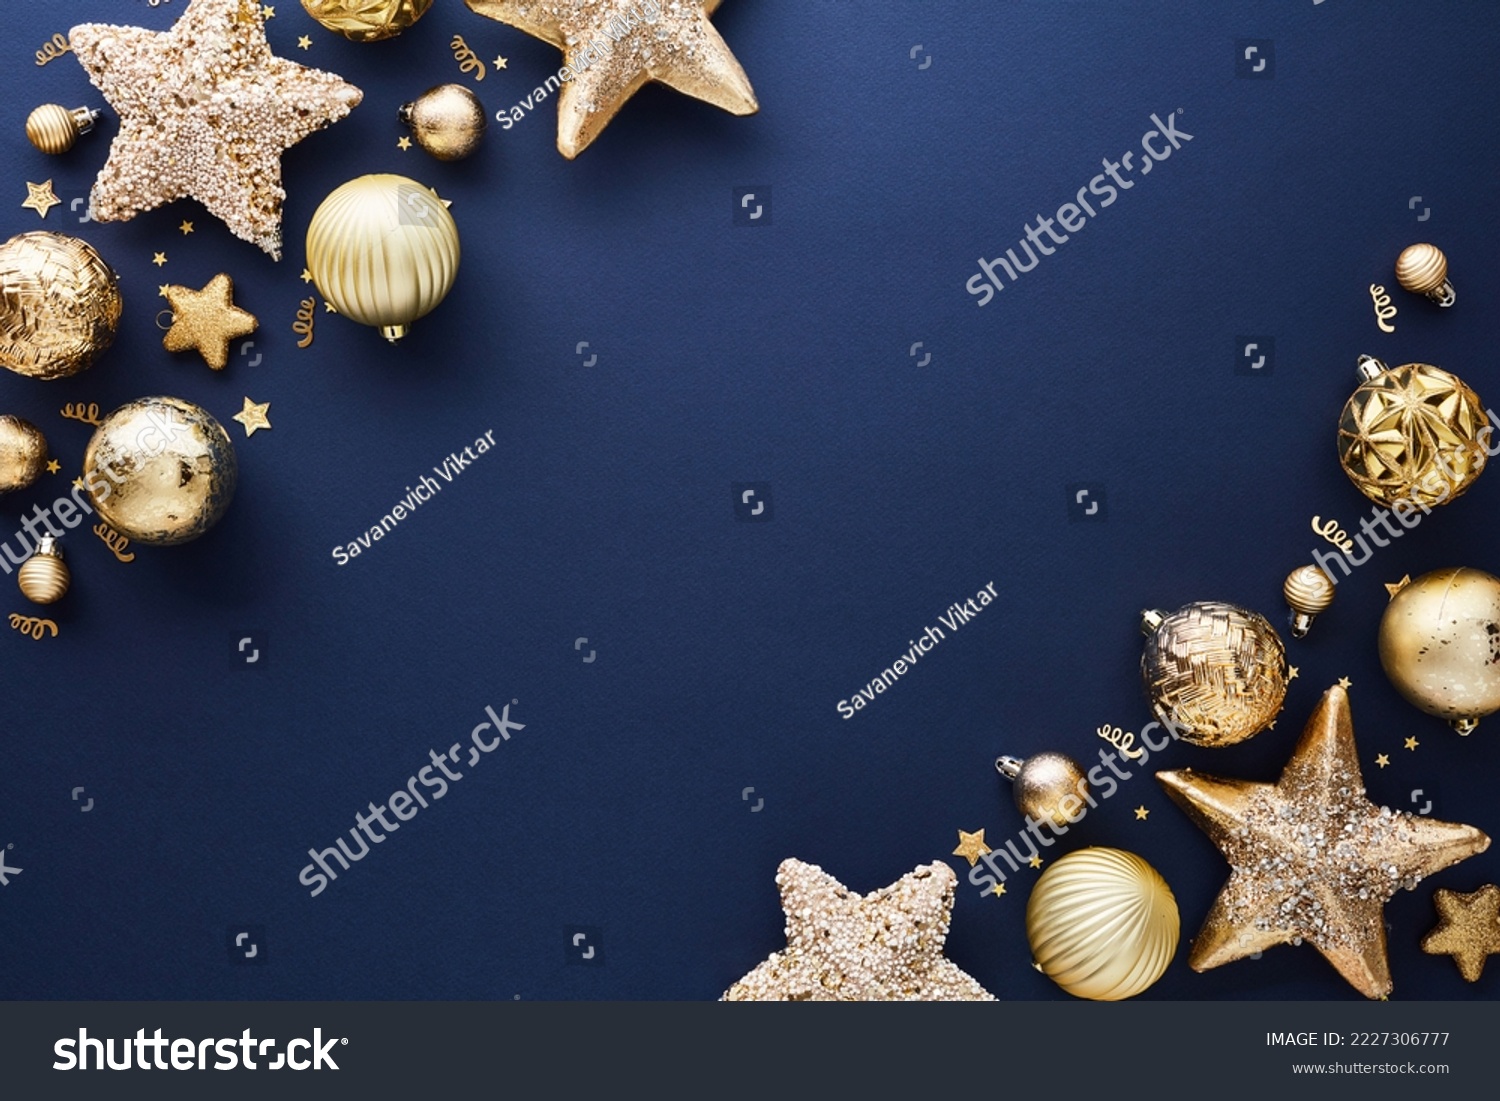 Modern Blue Christmas background with gold stars, balls, confetti. Elegant Christmas greeting card design, Happy New Year banner mockup #2227306777